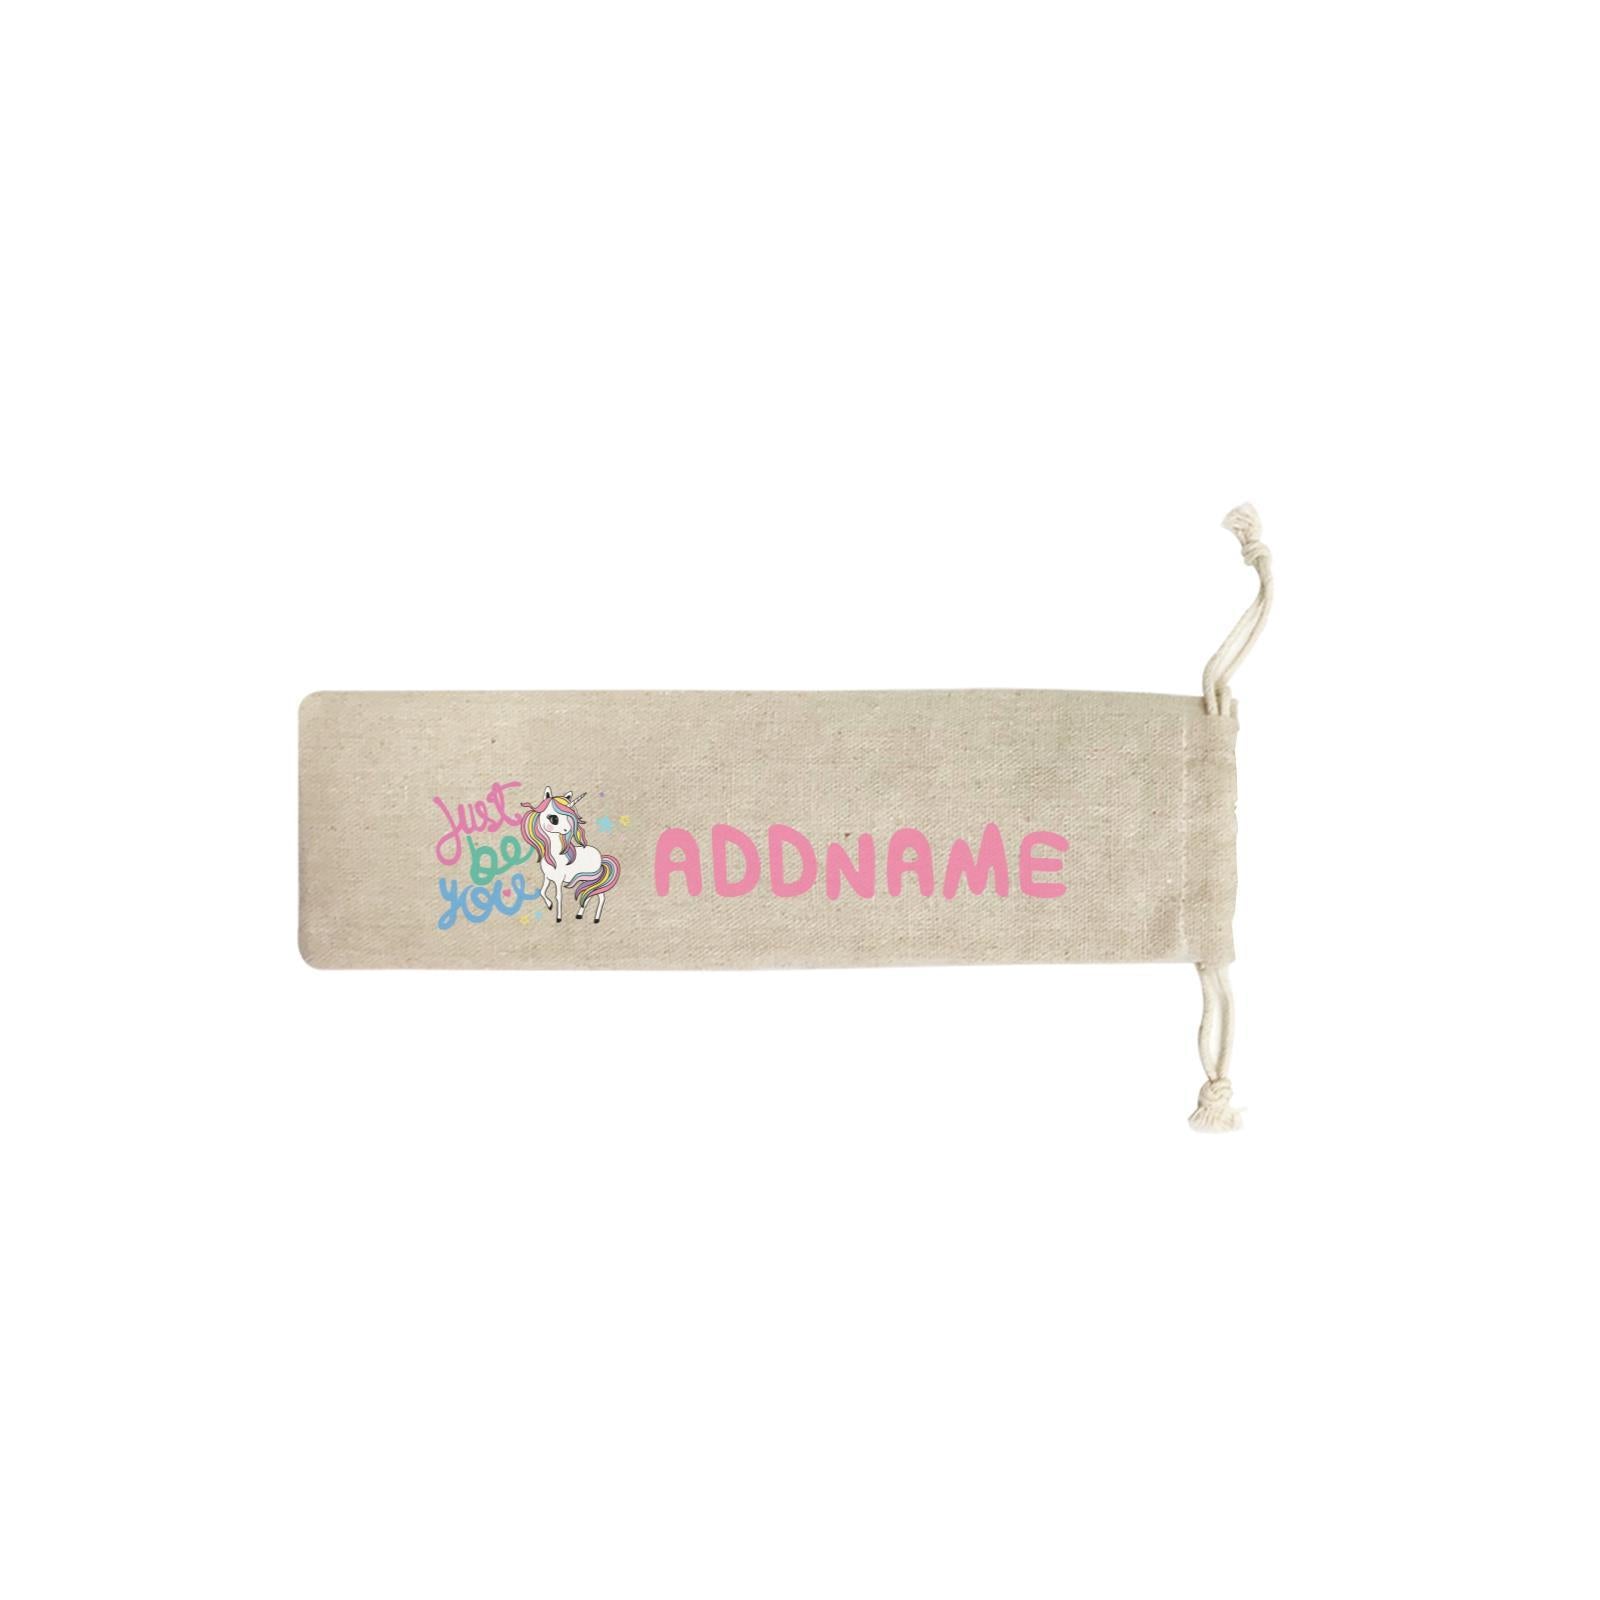 Children's Day Gift Series Just Be You Cute Unicorn Addname SB Straw Pouch (No Straws included)